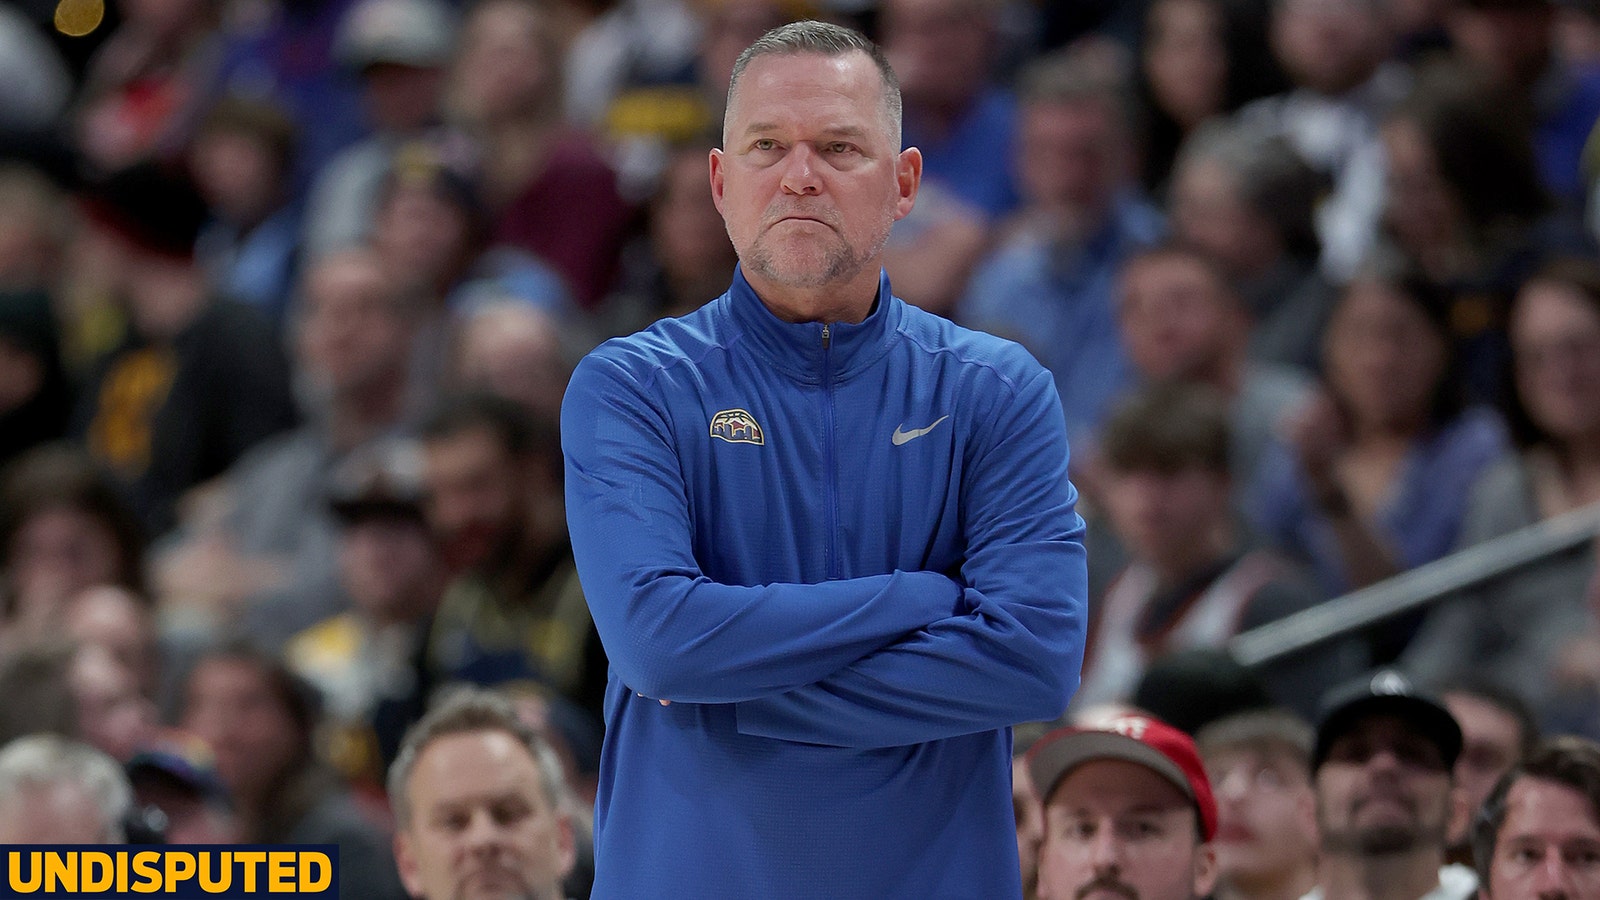 Nuggets HC Mike Malone on Lakers: ‘If we’re on their minds, that’s on them’